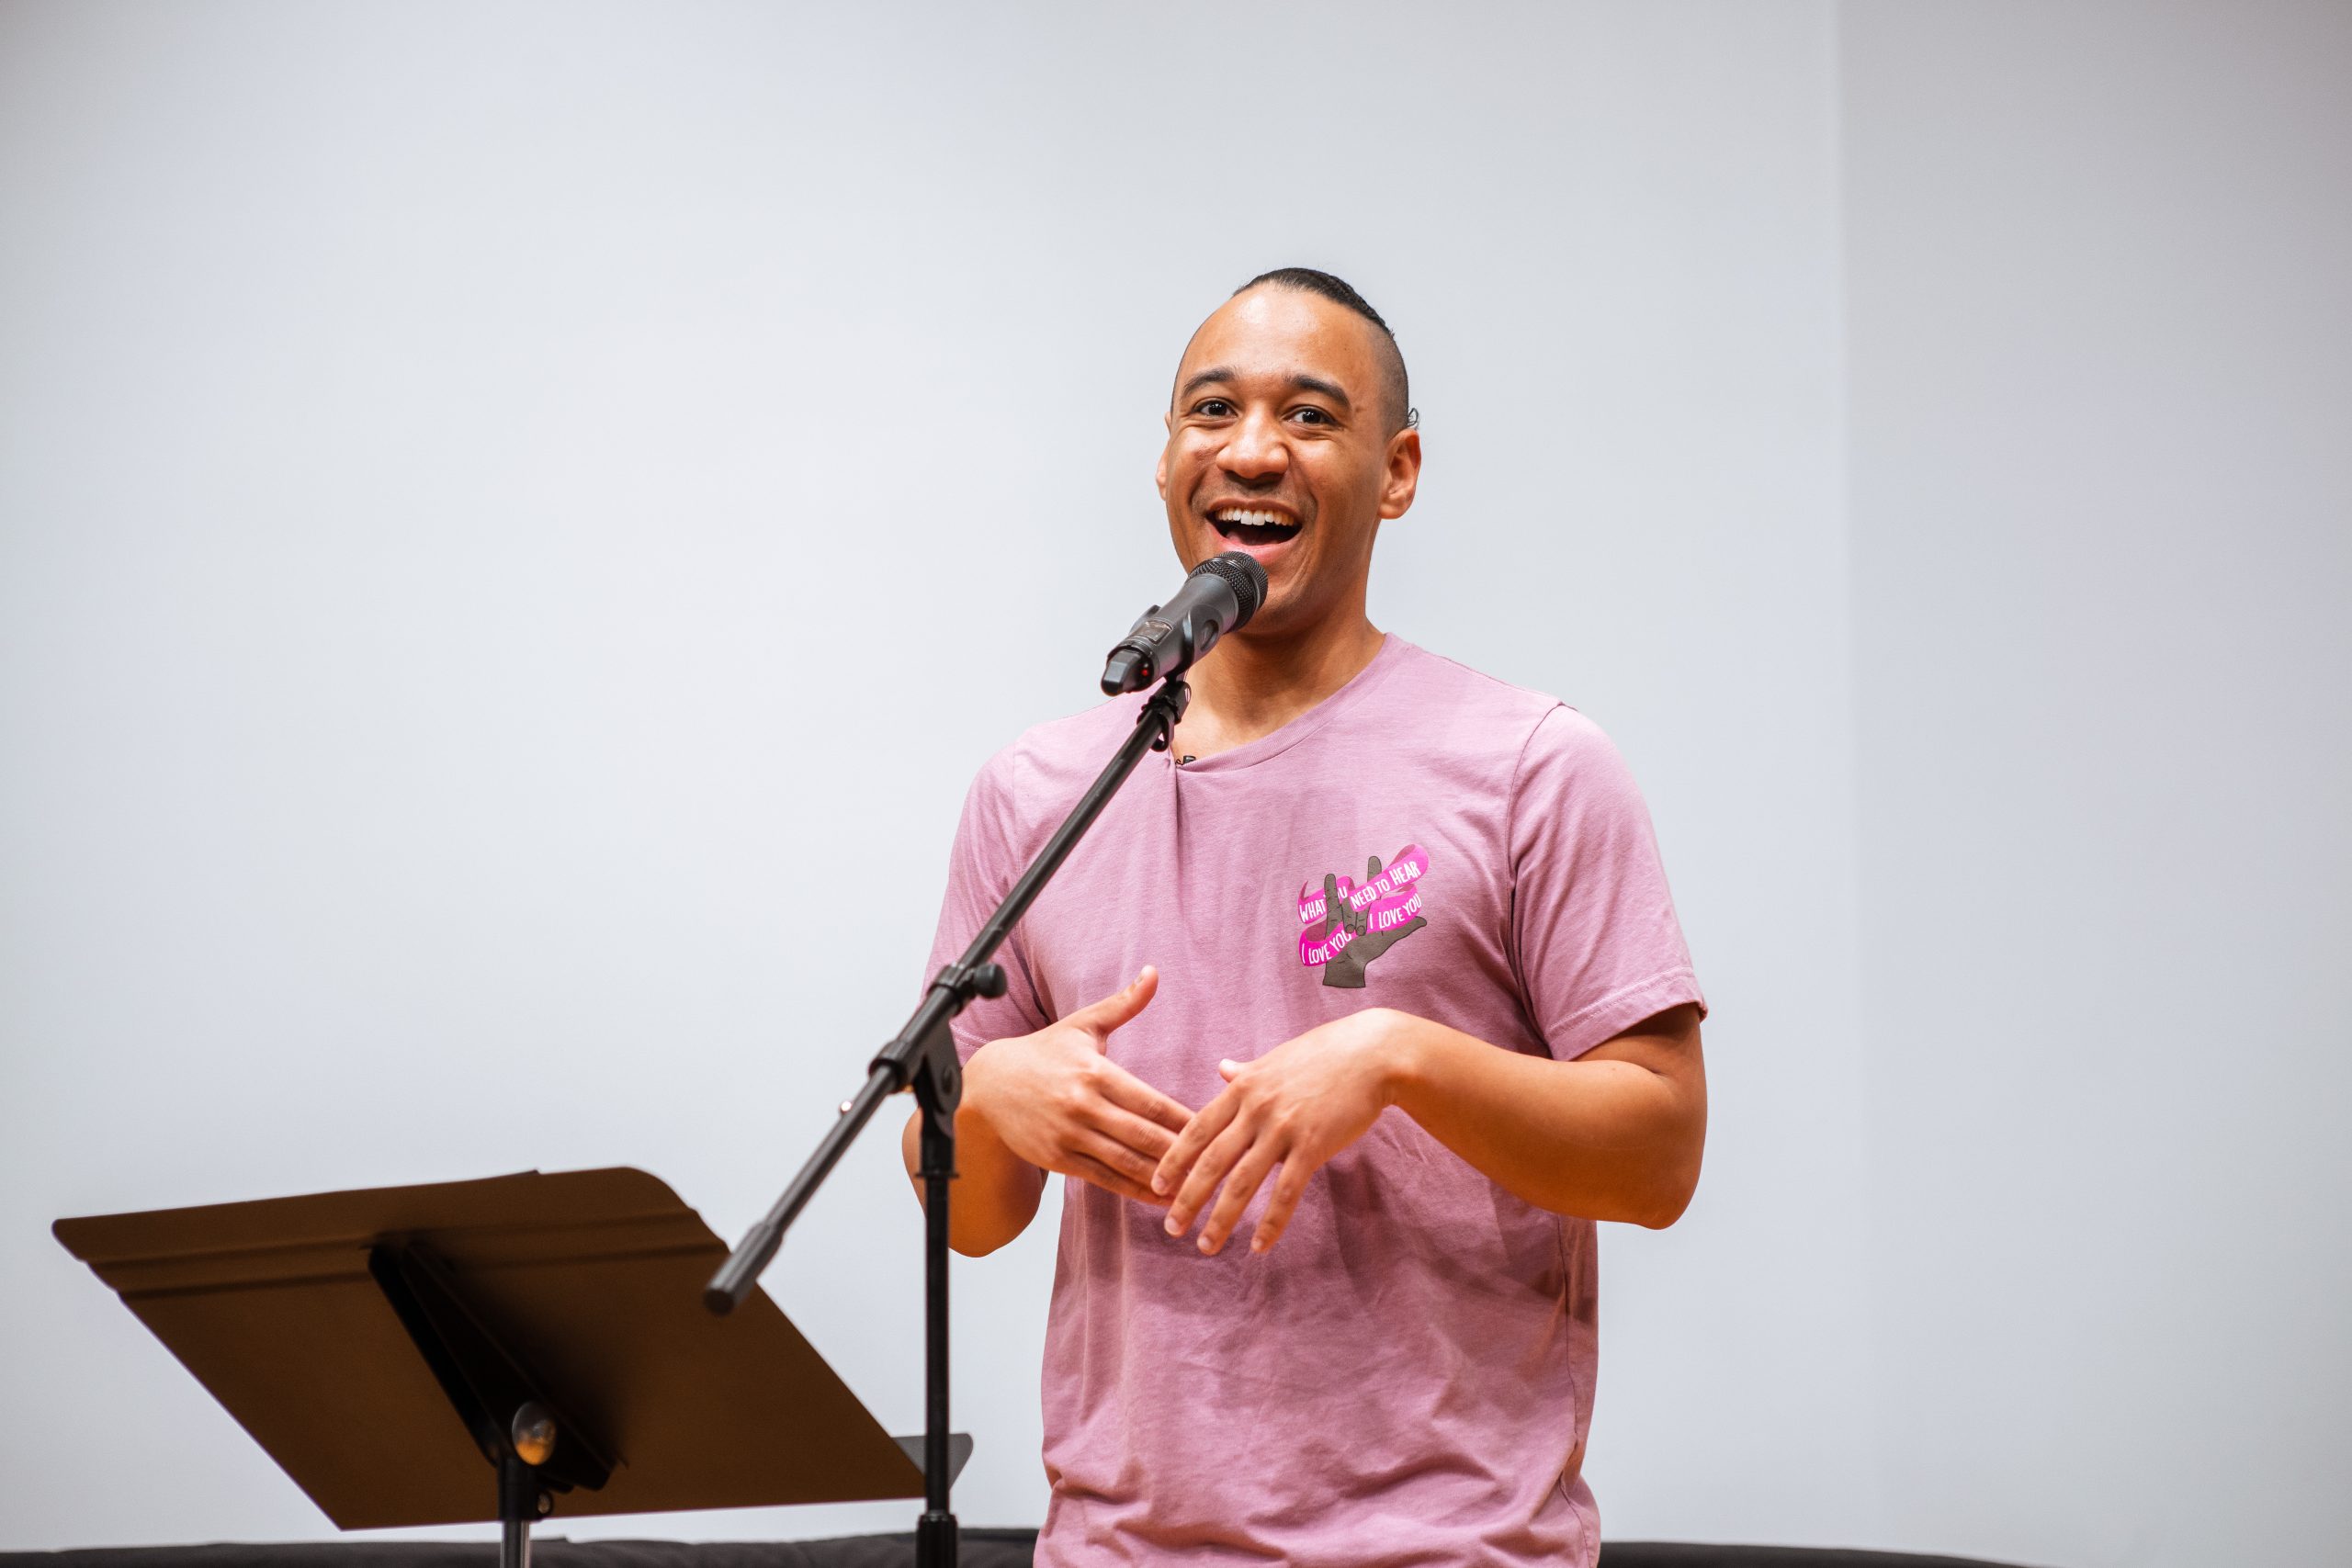 Portrait of a person in a pink t-shirt smiling while speaking into a microphone in front of a podium.